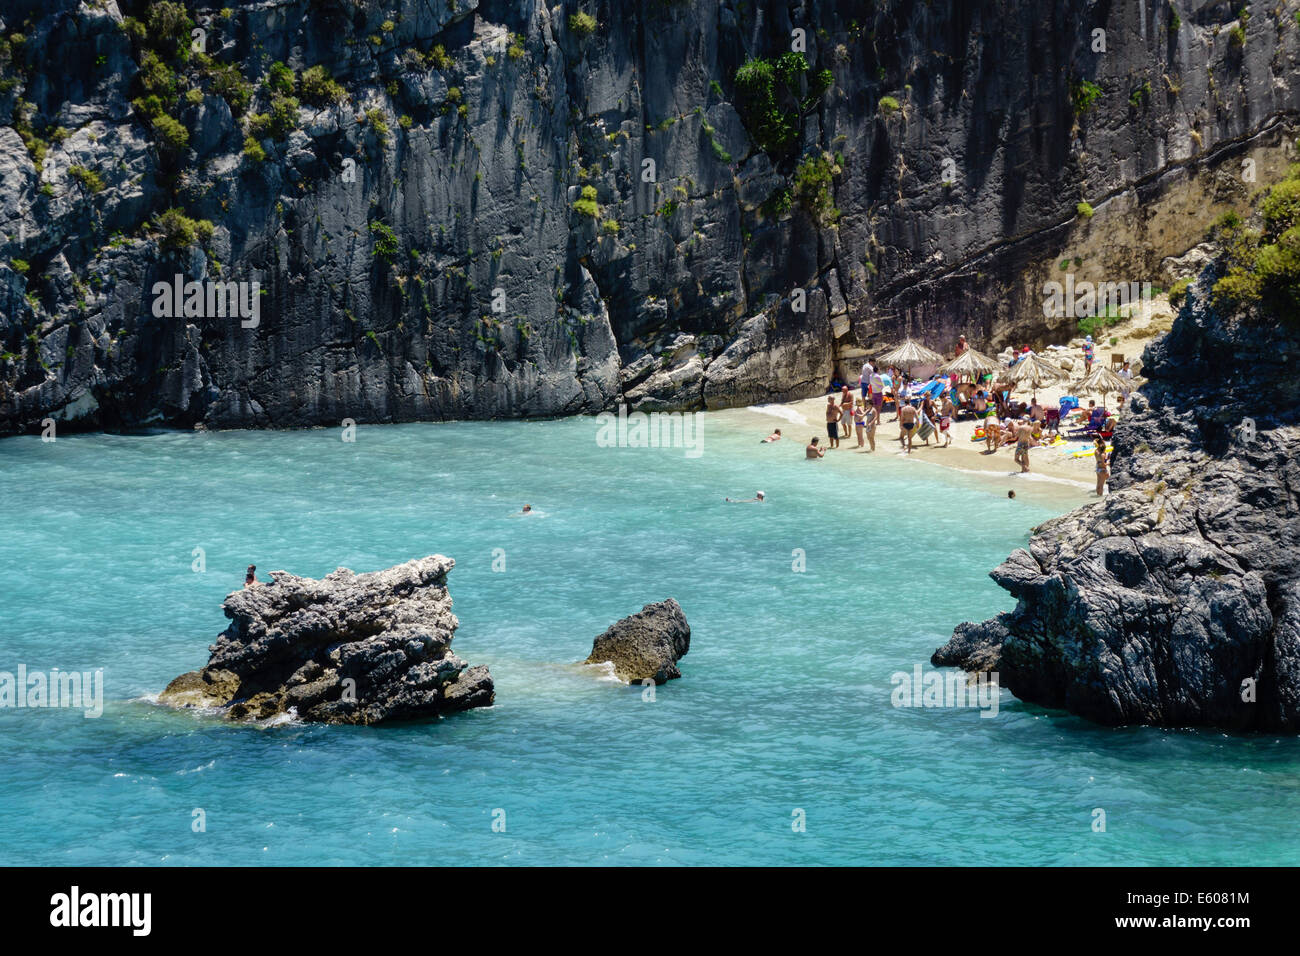 Zante, Greece - Xigia 'sulphur' beach famous for geothermal spring and sulphur smell. Stock Photo